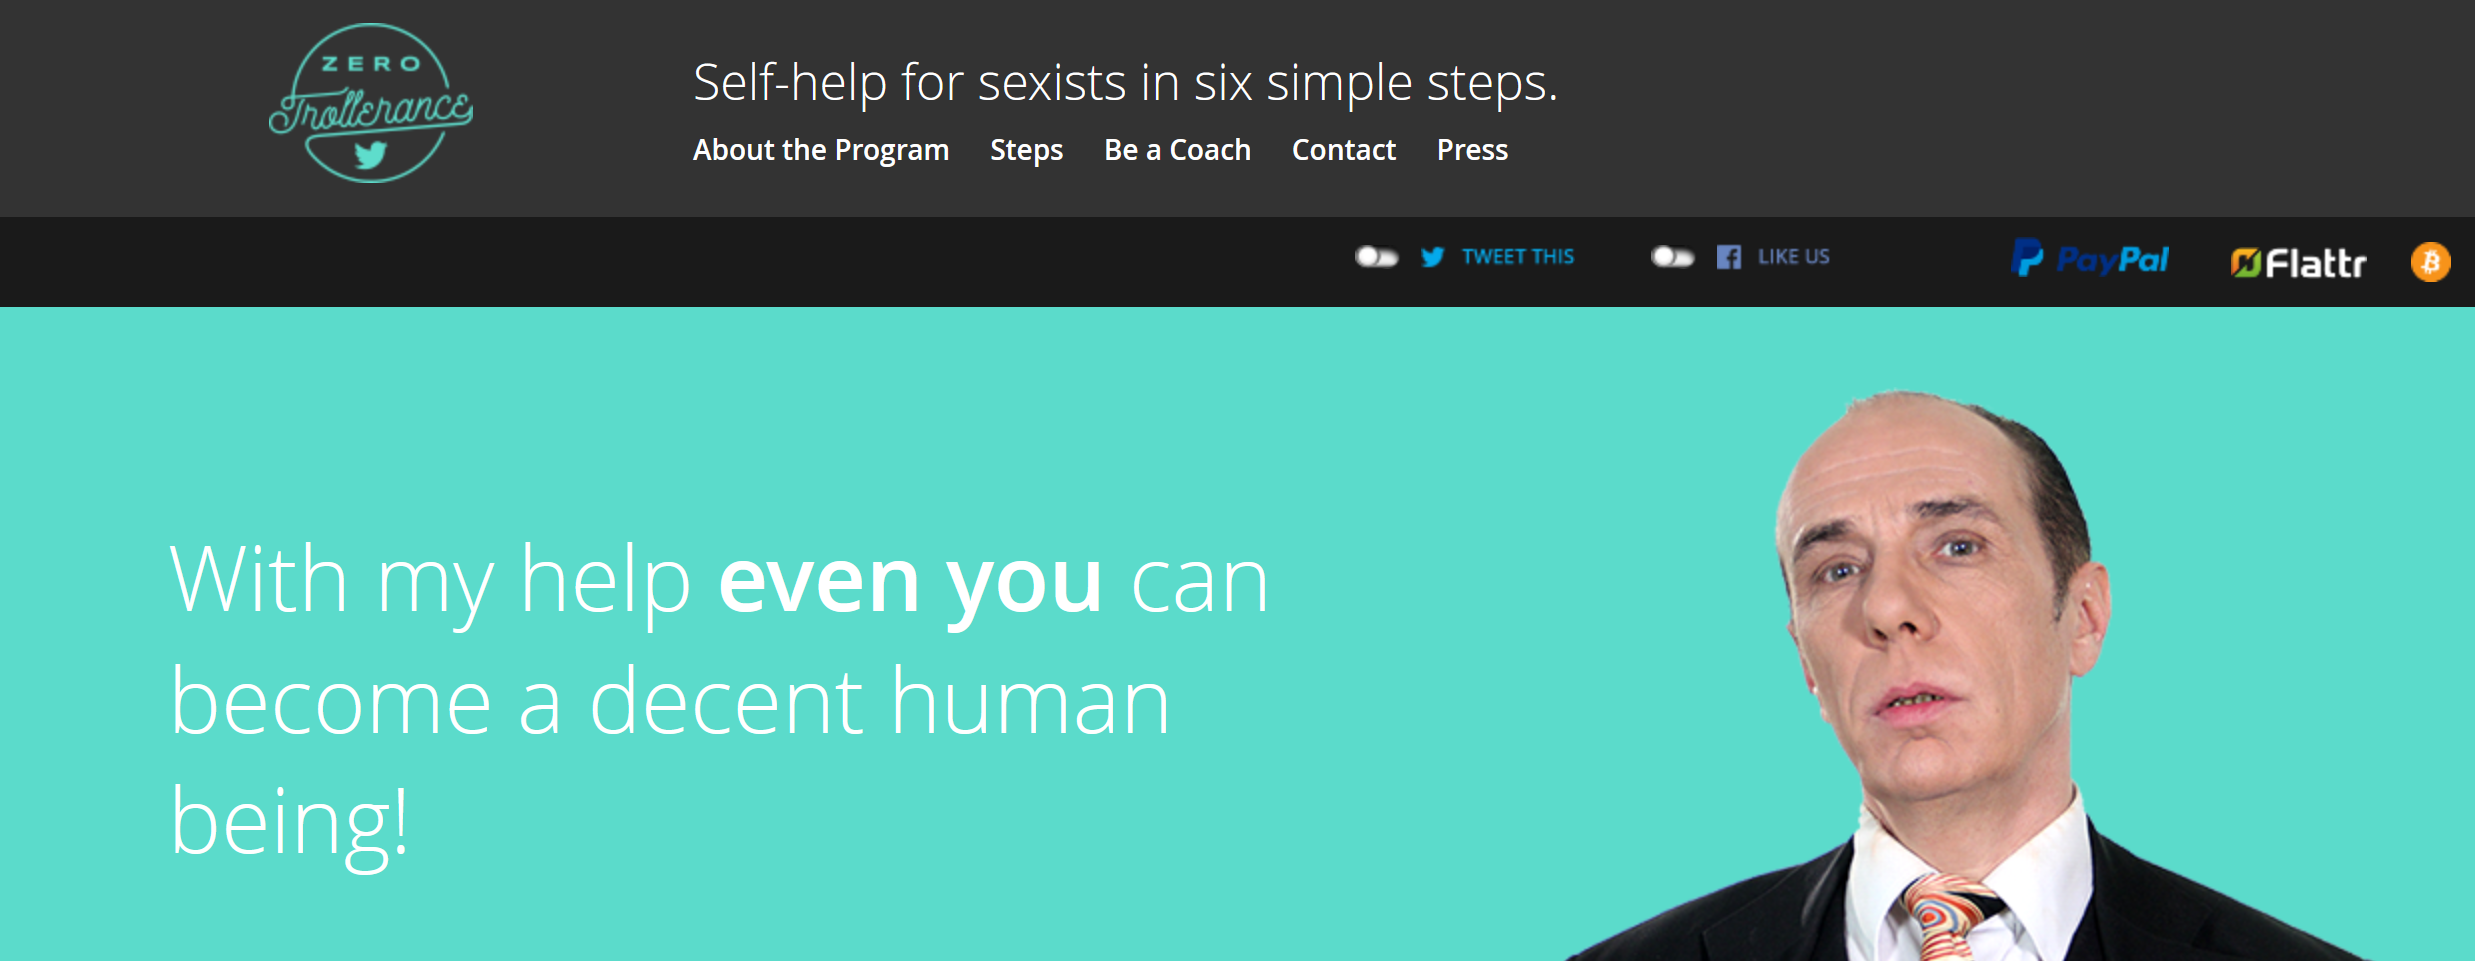 Homepage of the Zero Trollerance website, advertising 'self-help for sexists in six simple steps' and noting 'with my help even you can become a decent human being'